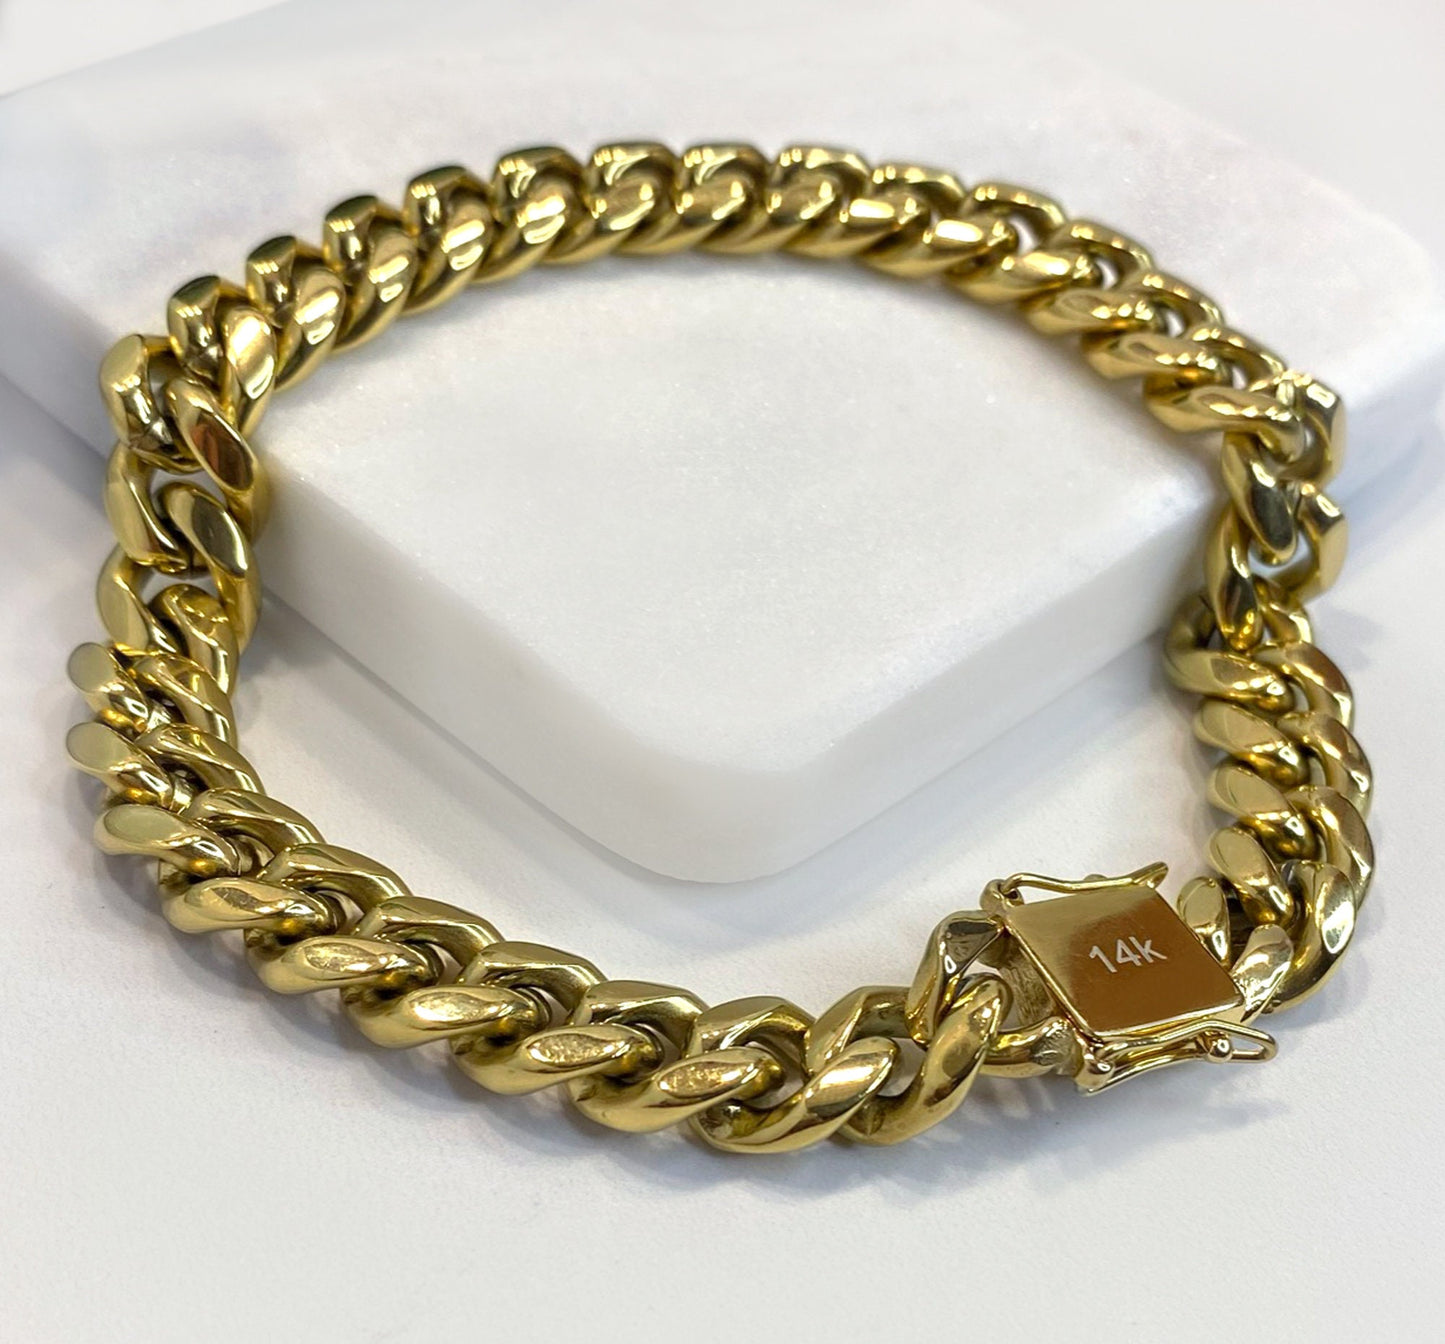 8mm Miami Cuban Chain in 14k Gold Filled, Double Safety Lock Box Clasp, Chunky Curb Link Chain, Unisex Necklace, Wholesale Jewelry Supplies